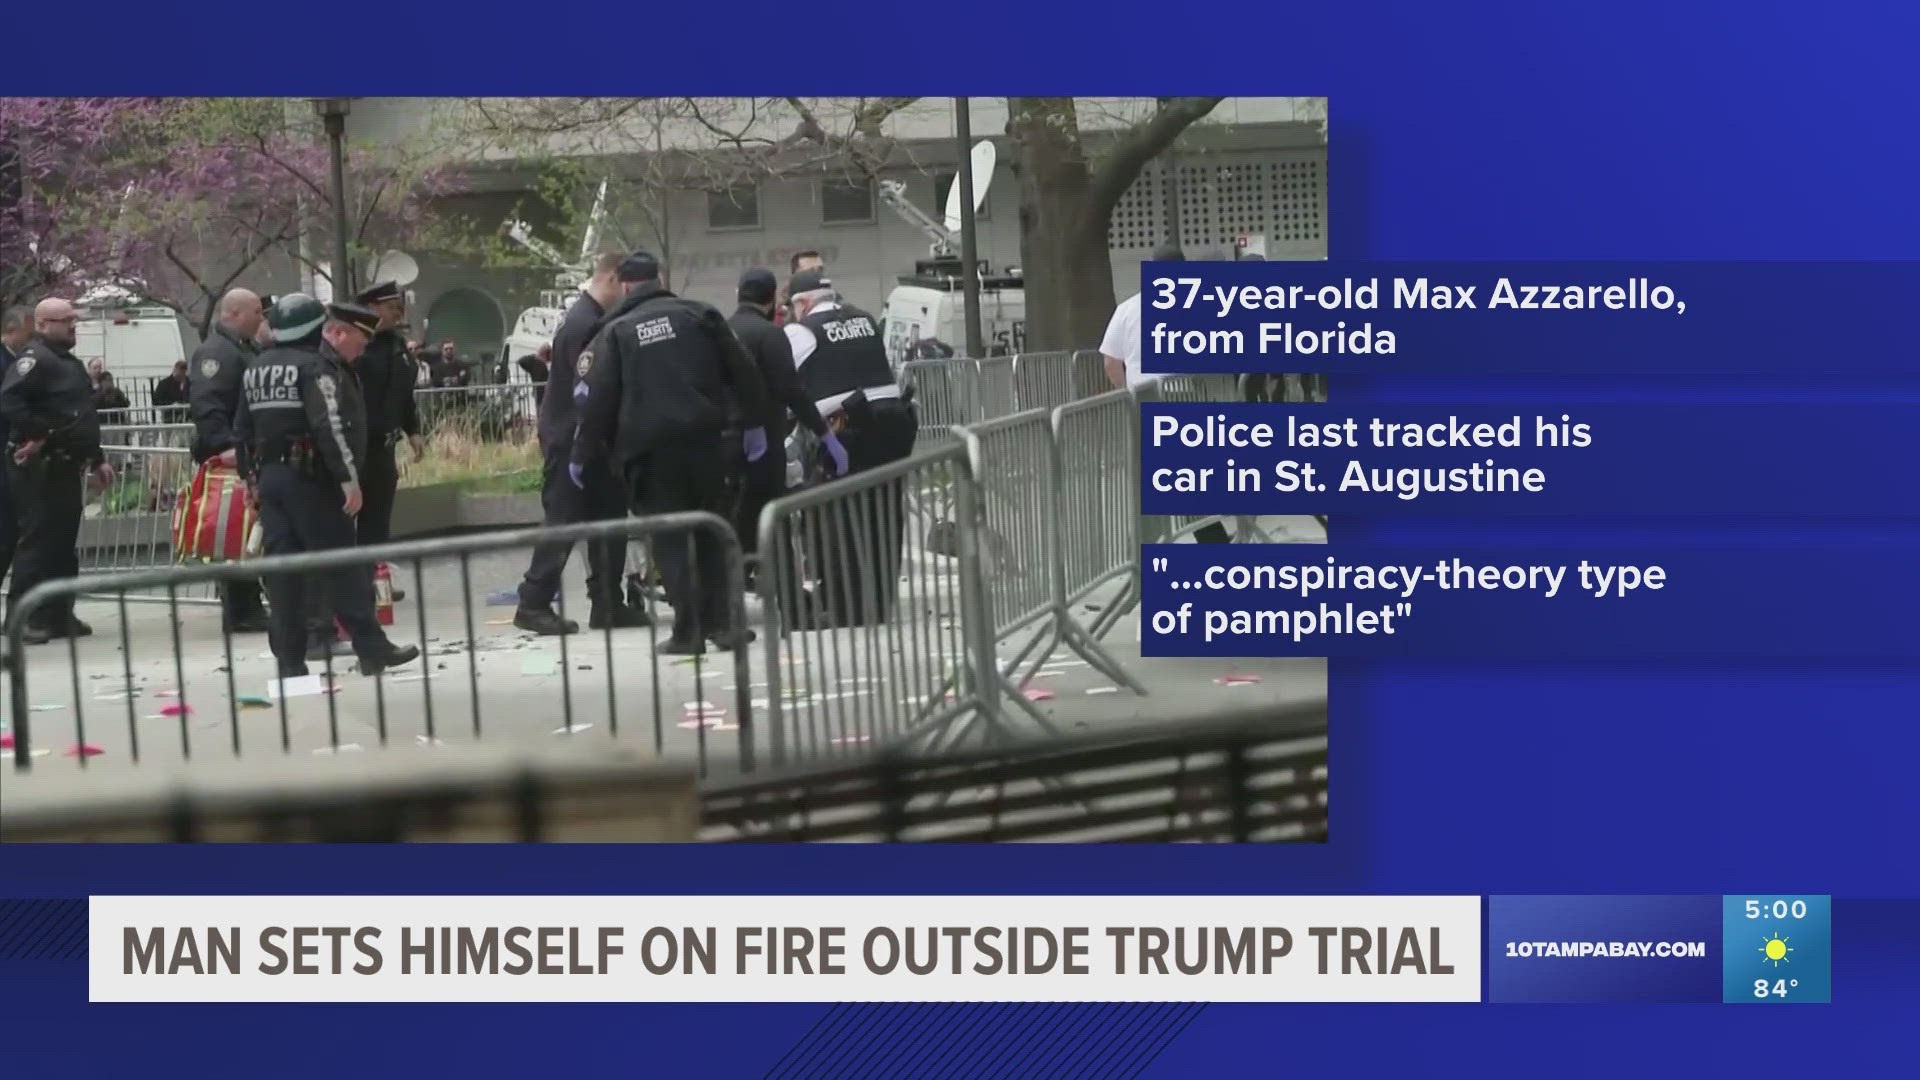 The incident happened in a park outside the courthouse just minutes after the final jury selections were being made in Trump's hush money trial.